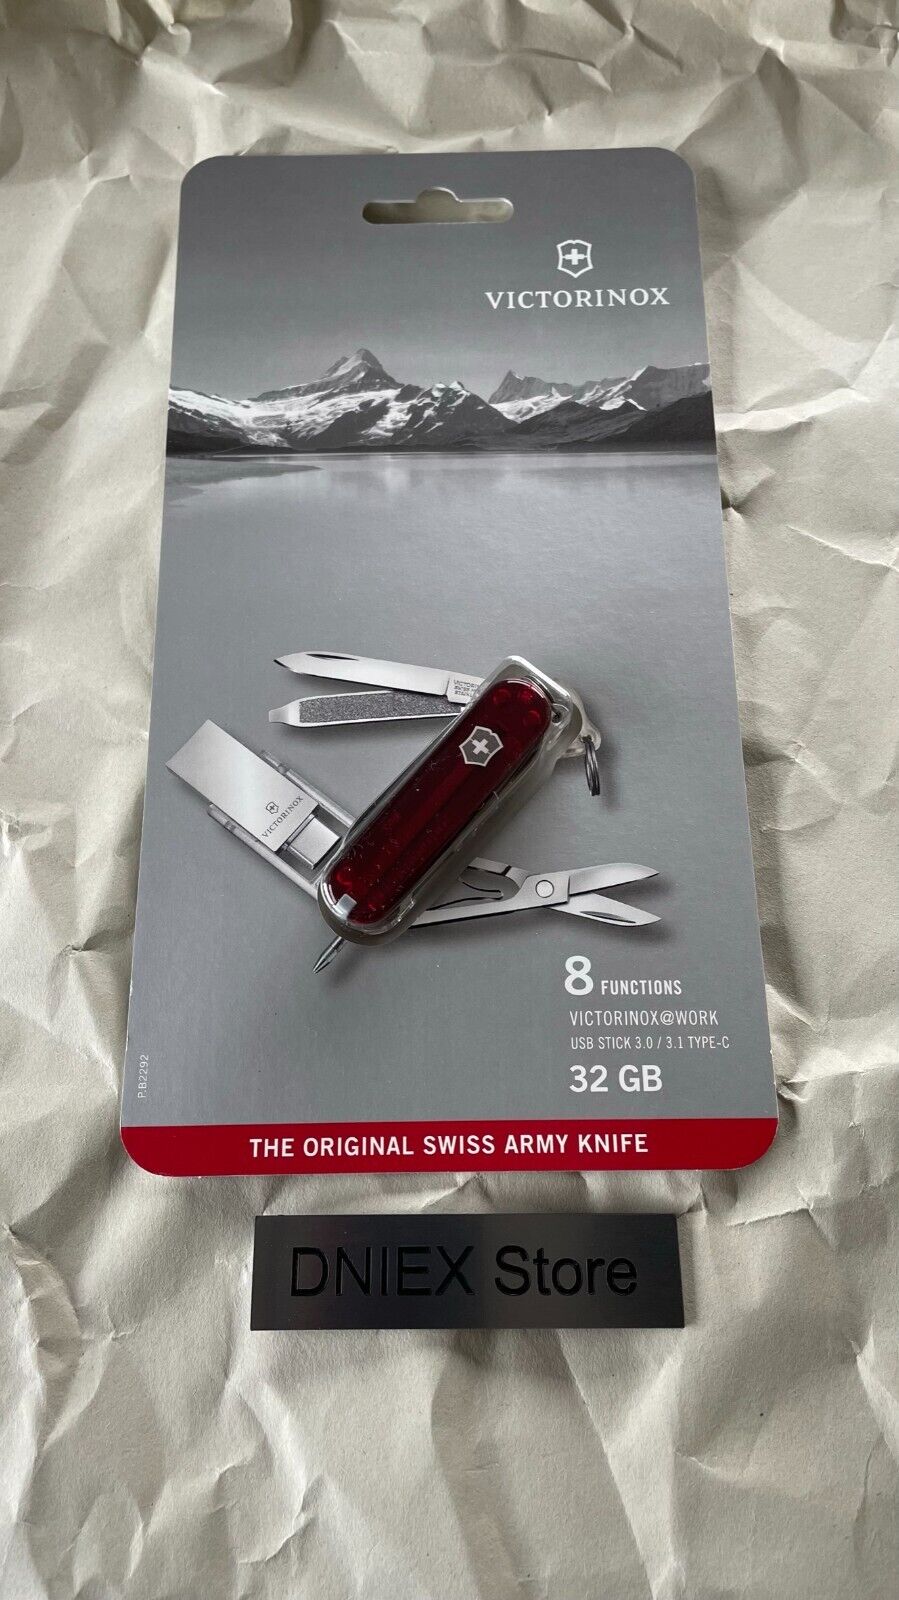 Victorinox 32GB USB memory multi-tool outdoor knife PC peripherals 8 functions